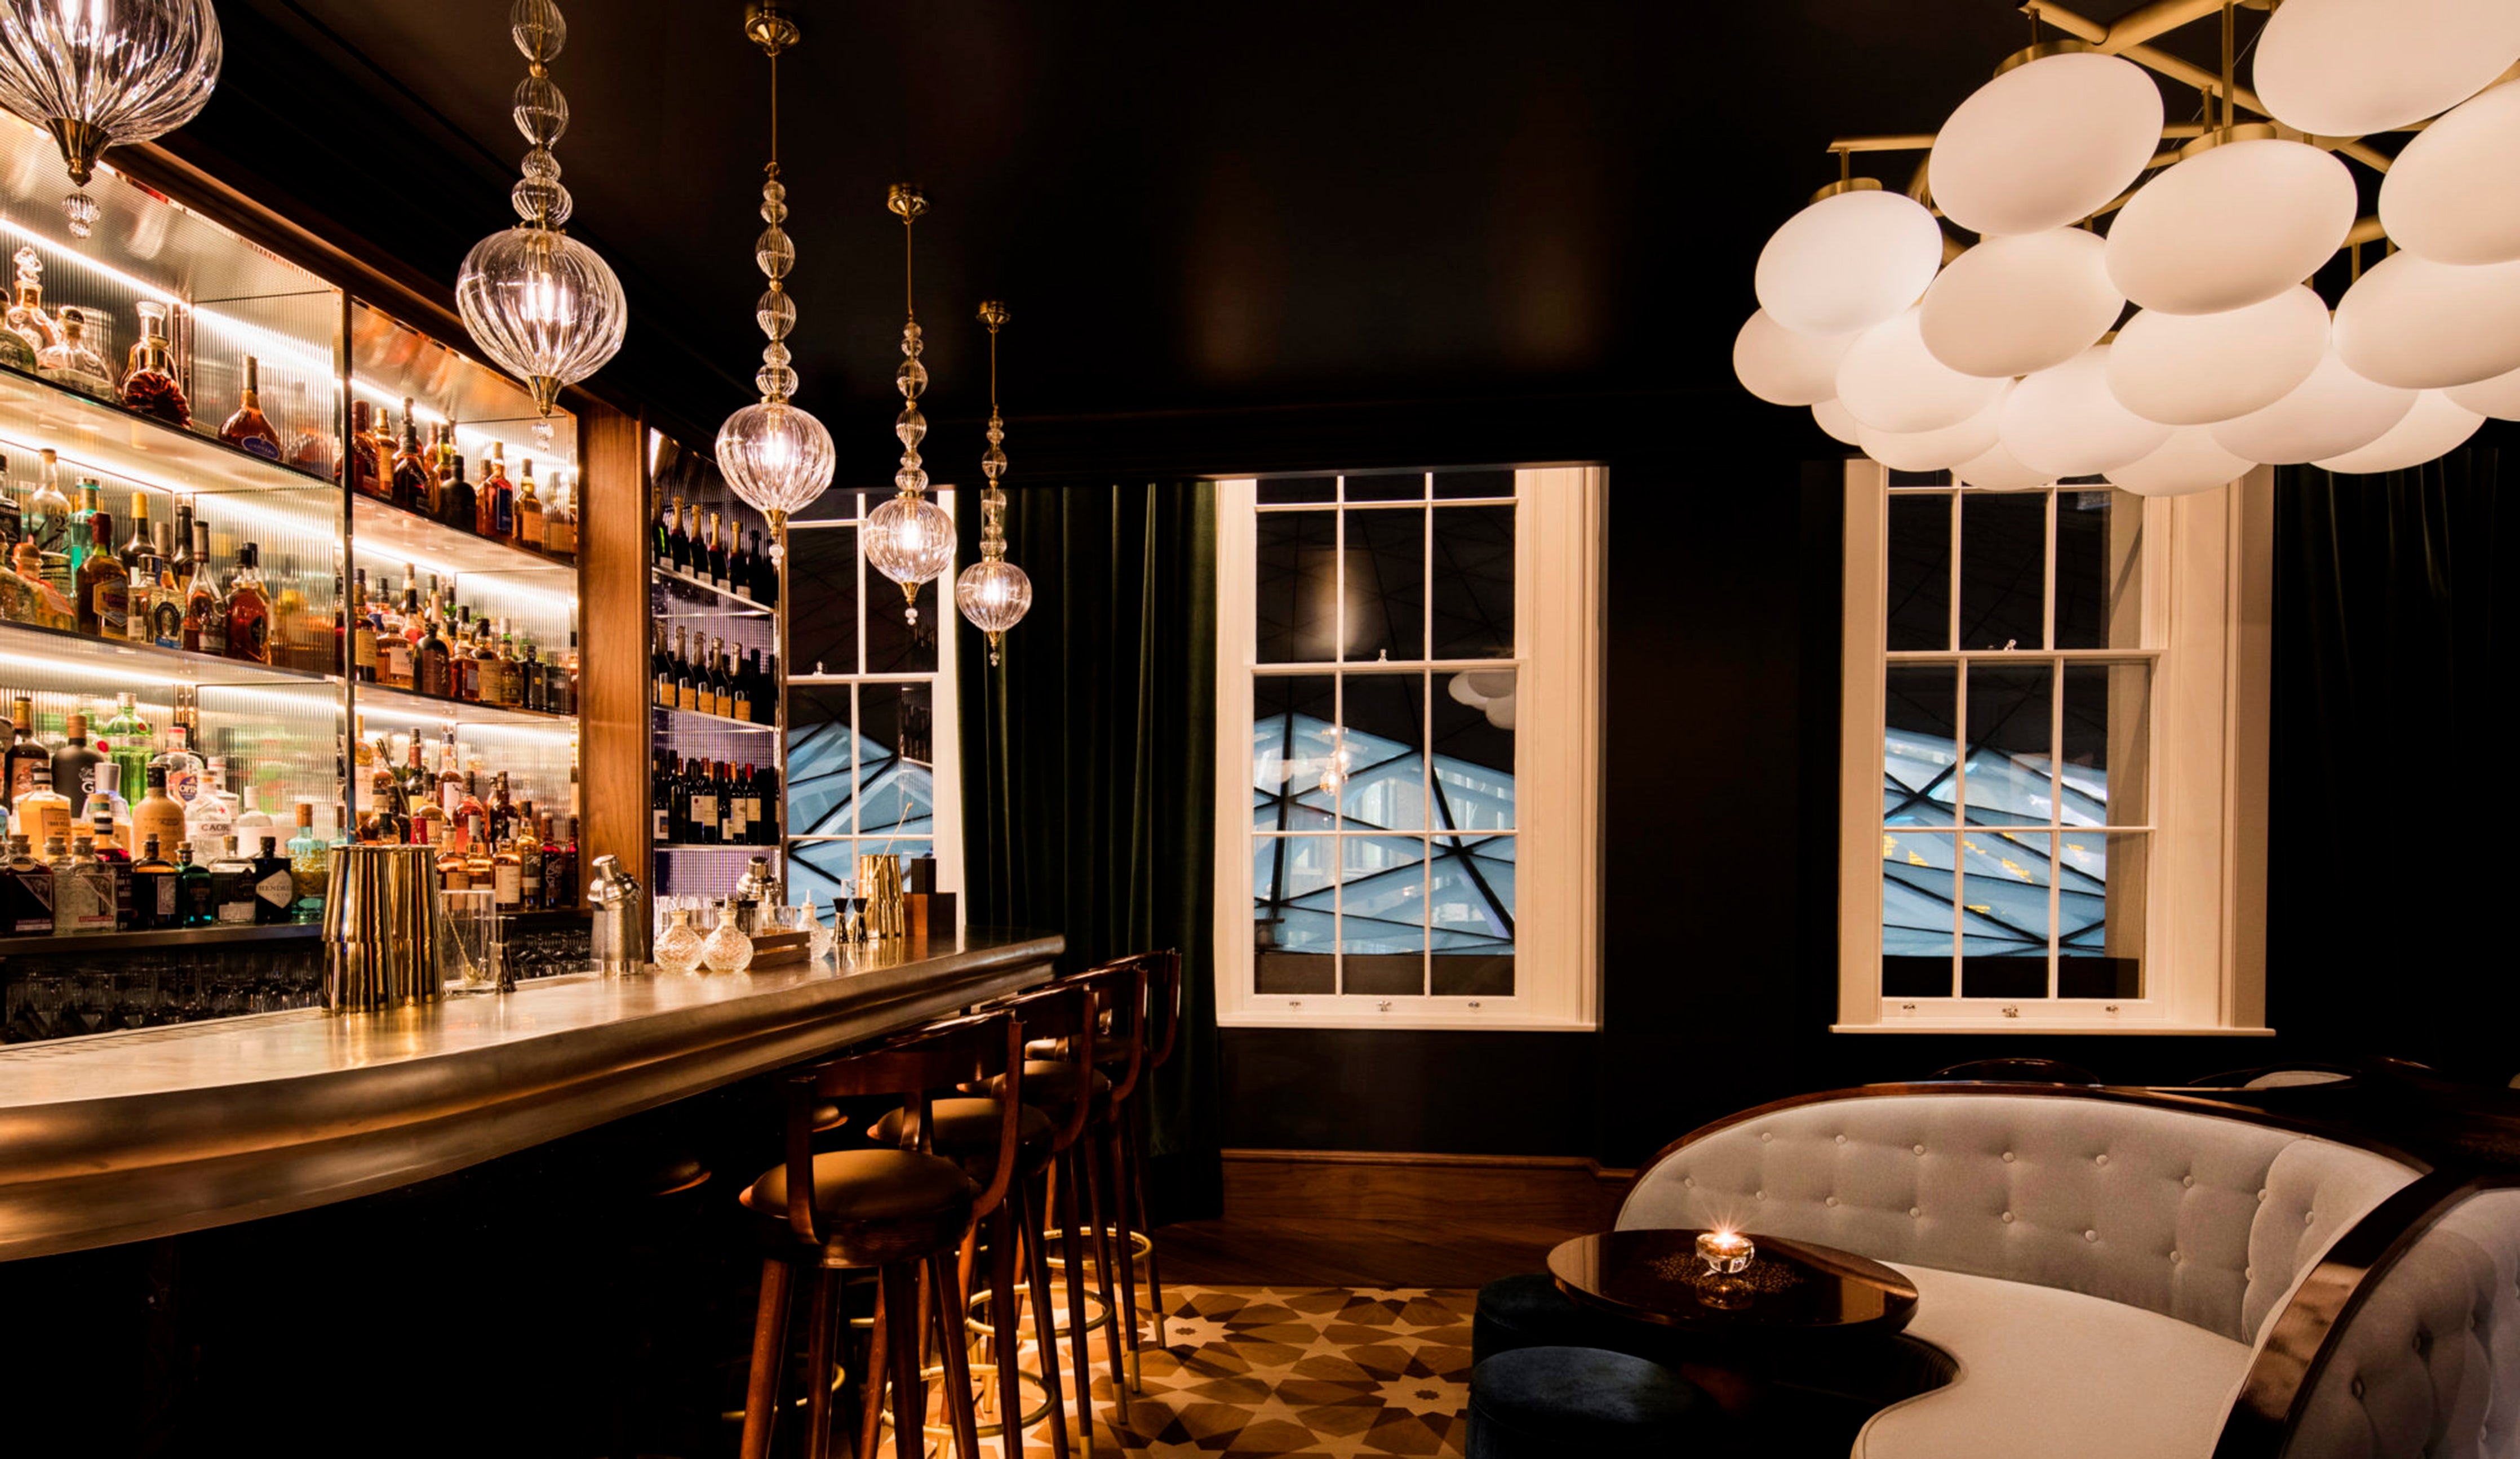 Bespoke glass pendants by Rothschild &amp; Bickers at the Anthracite Martini Bar in Kings Cross Great Northern Hotel